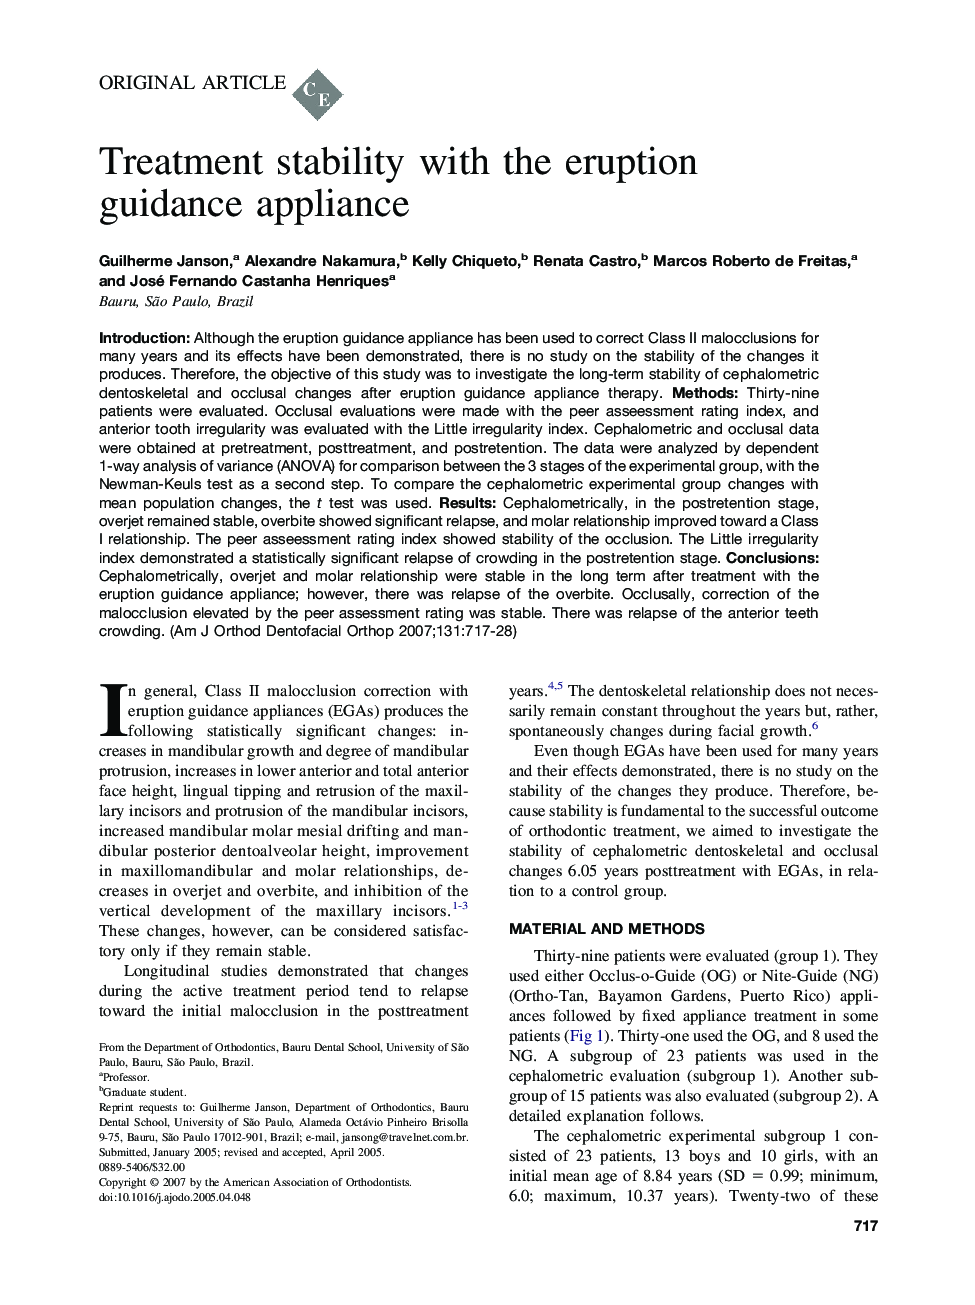 Treatment stability with the eruption guidance appliance